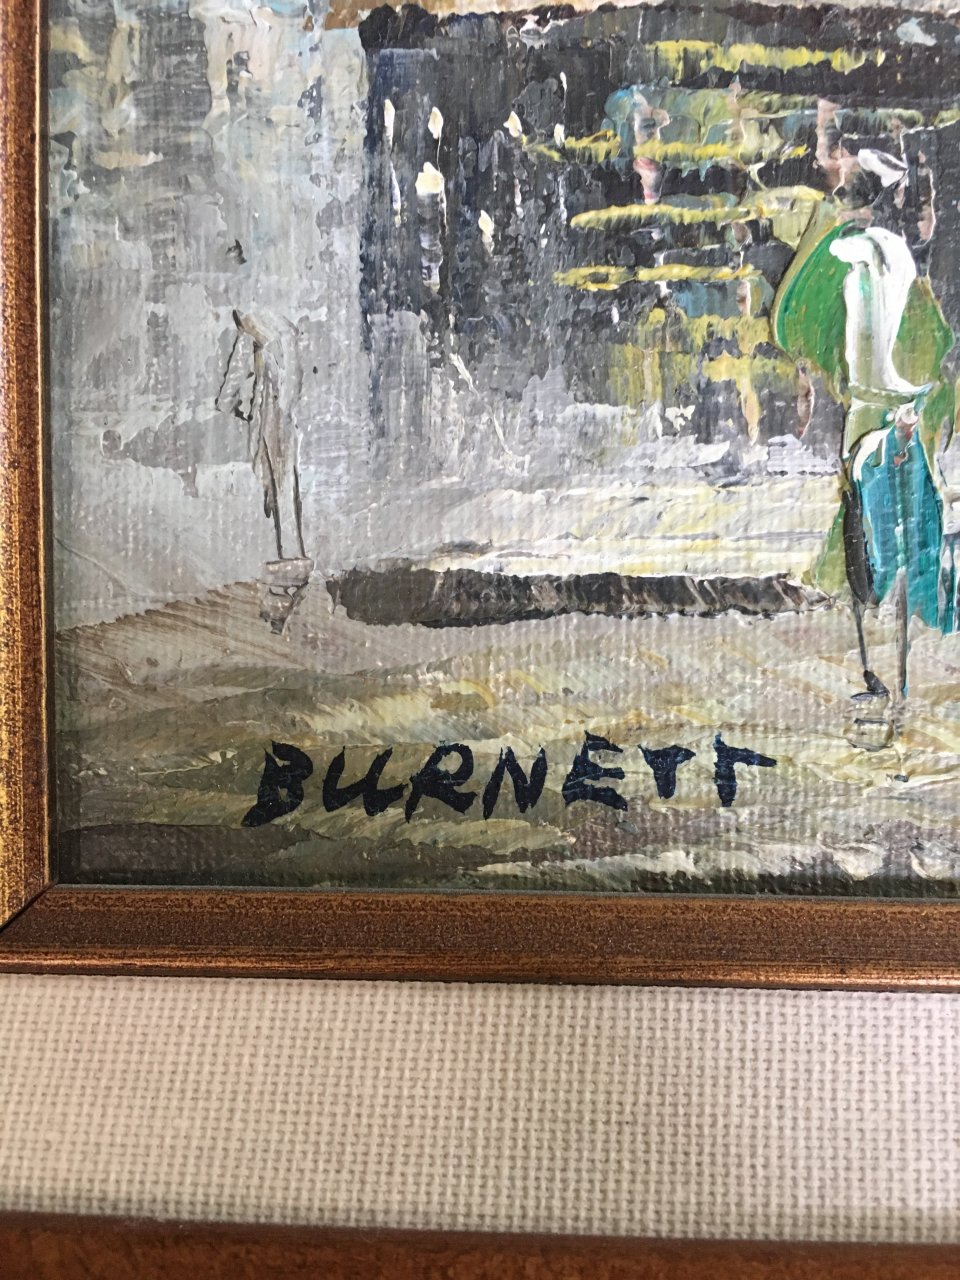 Burnett Painting For Sale | Artifact Collectors